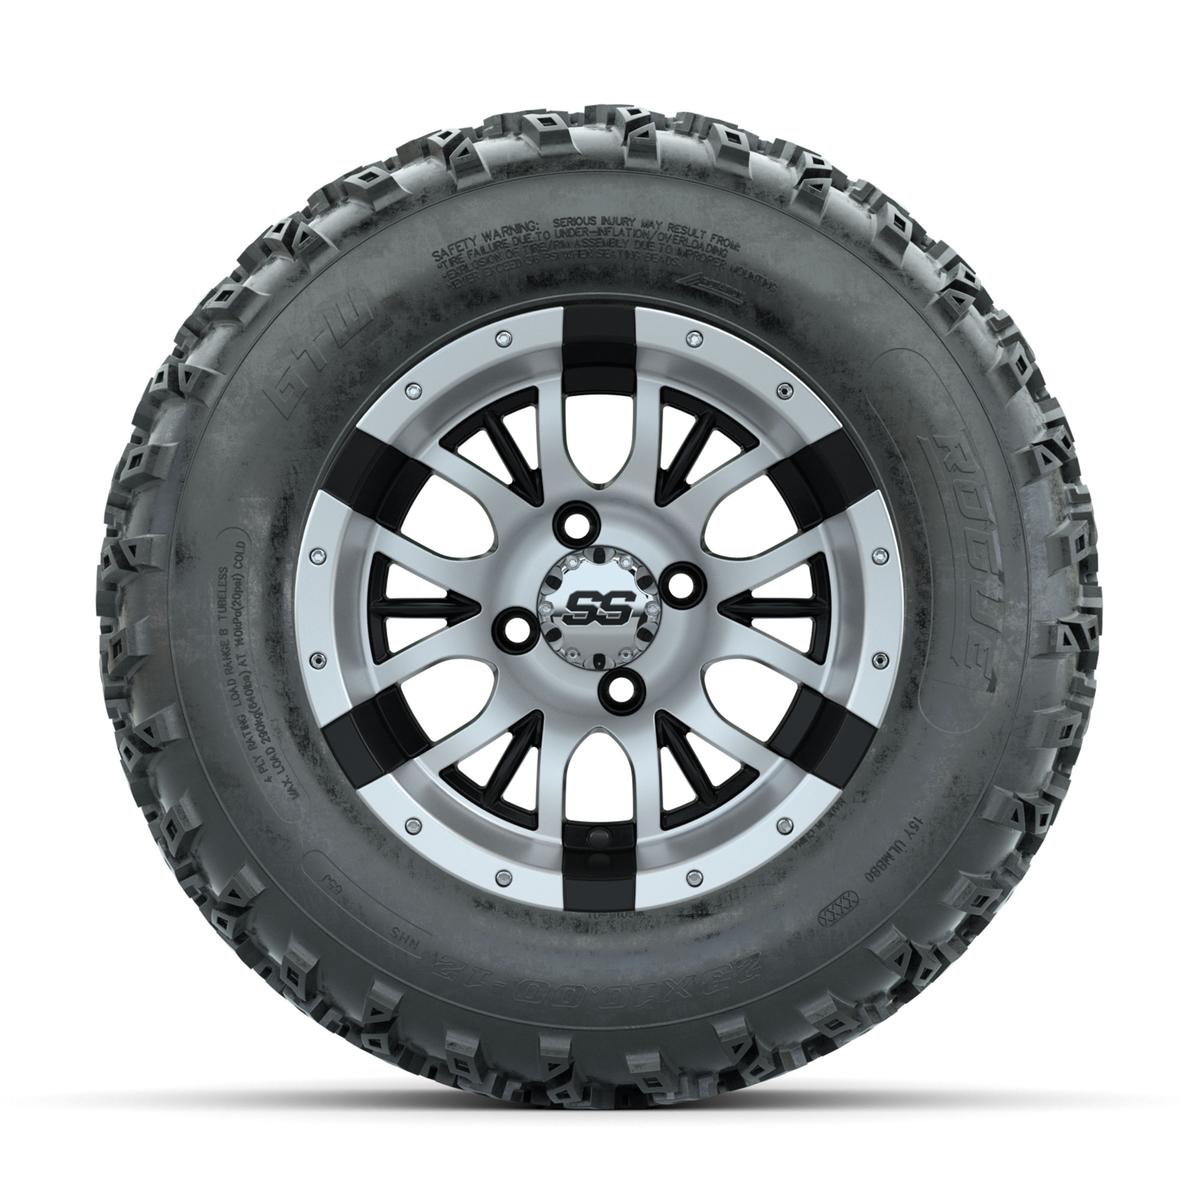 GTW Diesel Machined/Black 12 in Wheels with 23x10.00-12 Rogue All Terrain Tires – Full Set